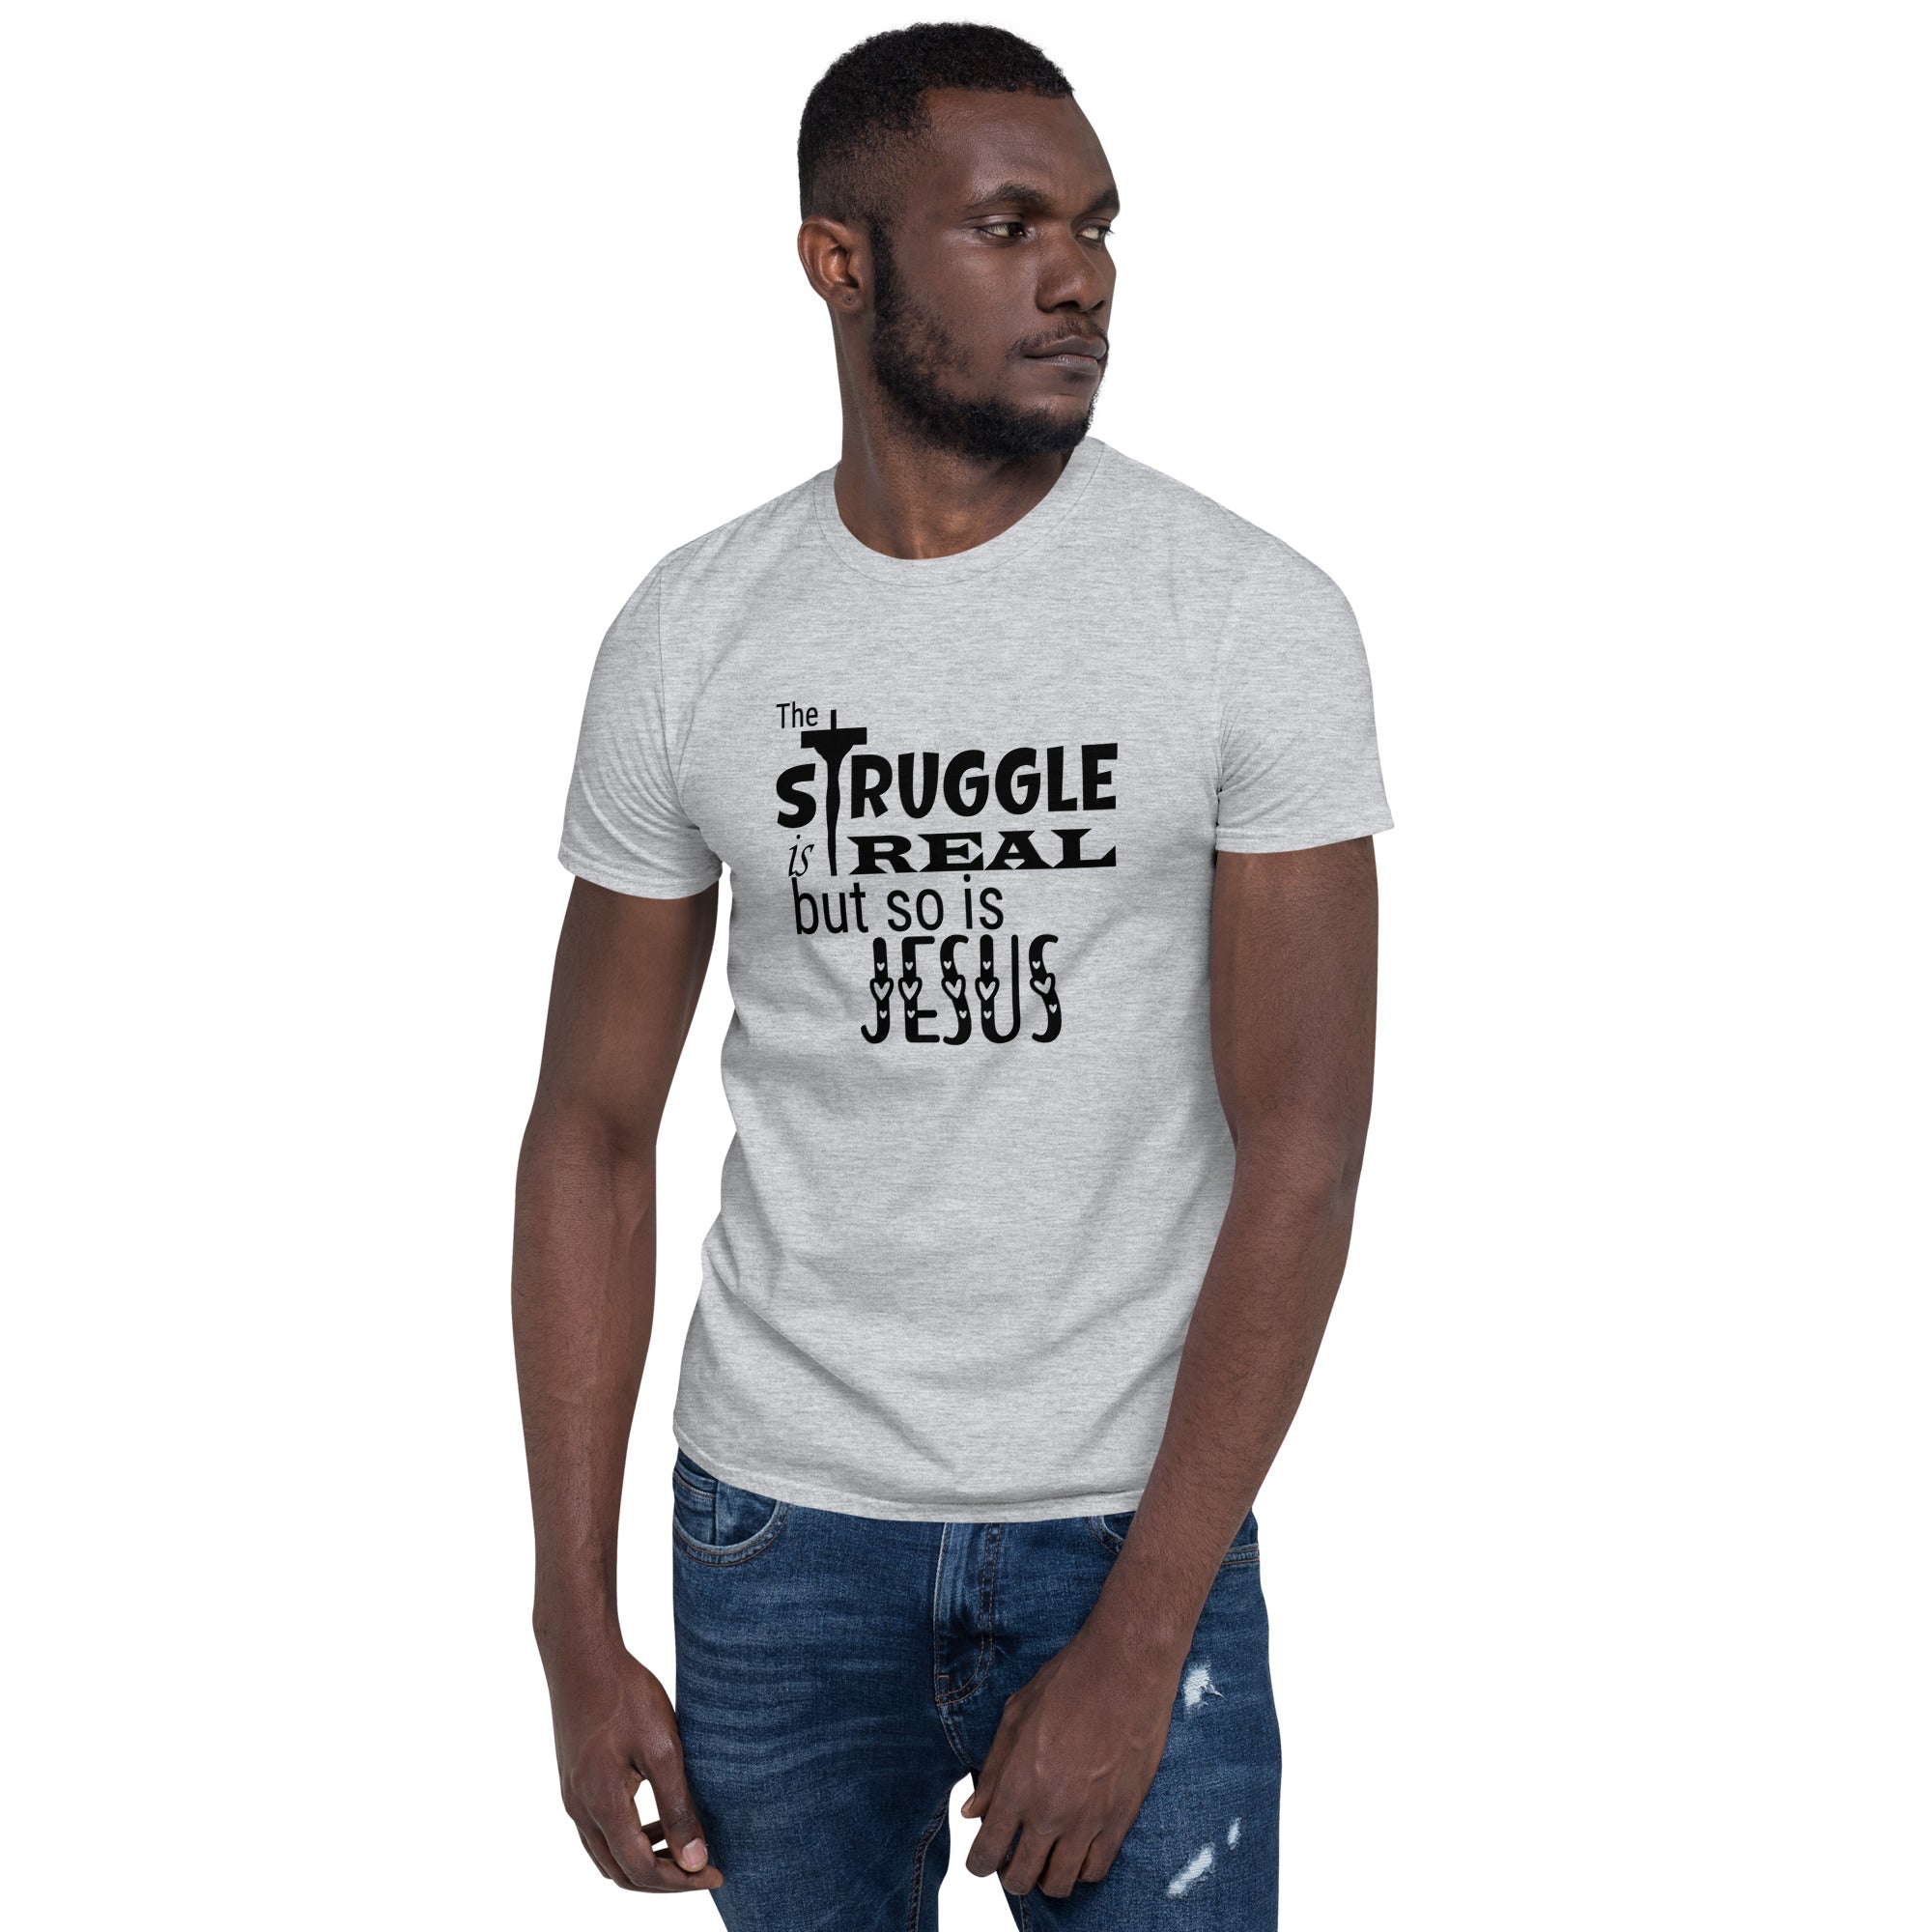 The Struggle Is Real But So Is Jesus - Short-Sleeve Unisex T-Shirt